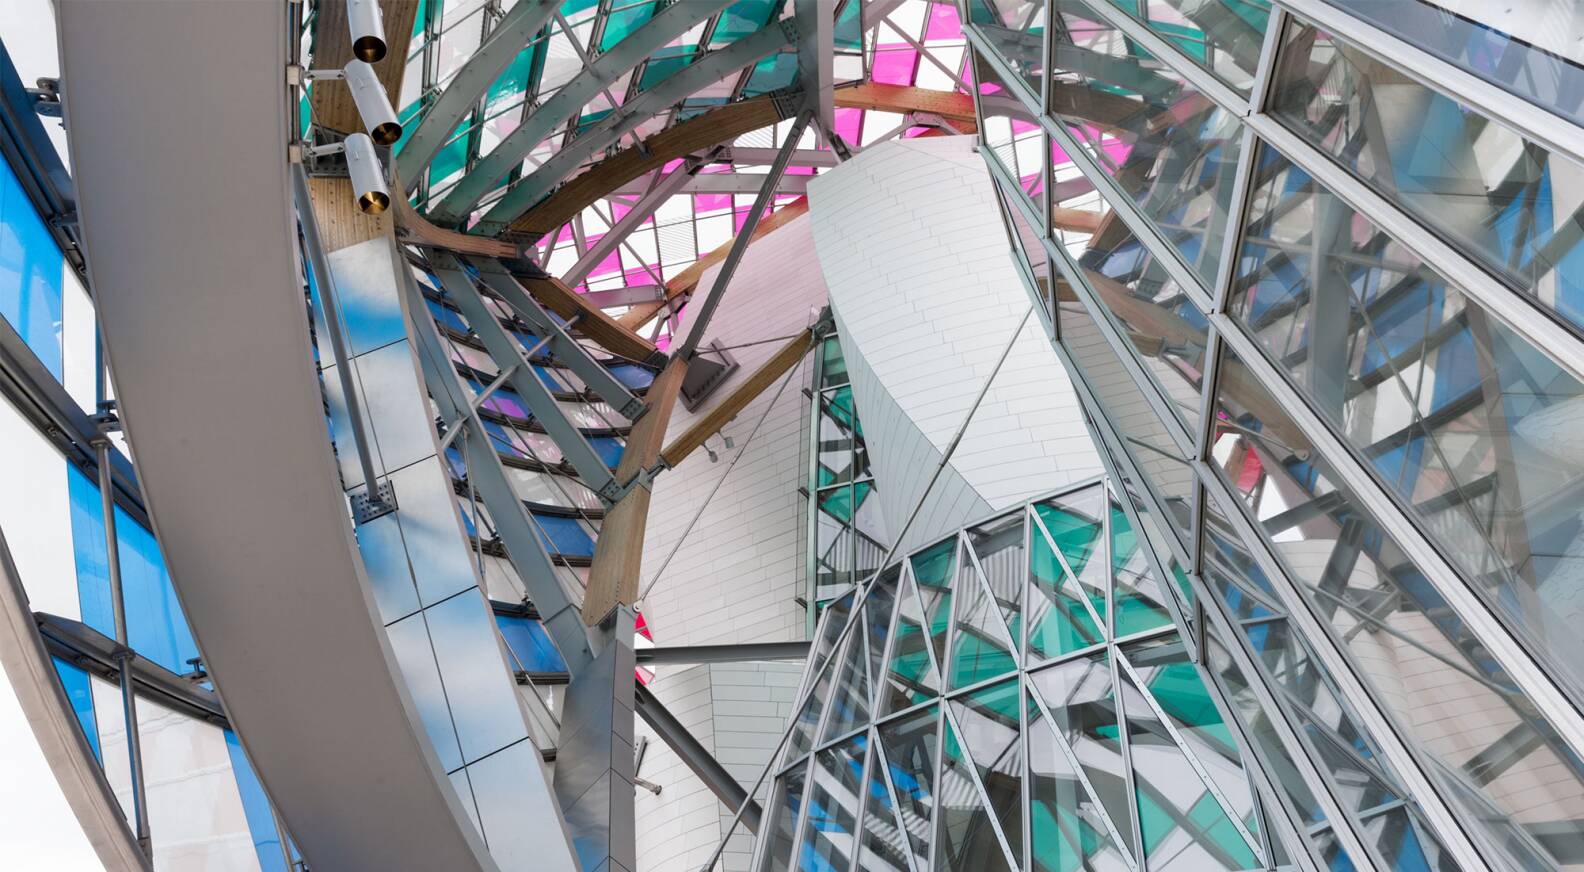 Fondation Louis Vuitton brings the arts right into your home! - LVMH